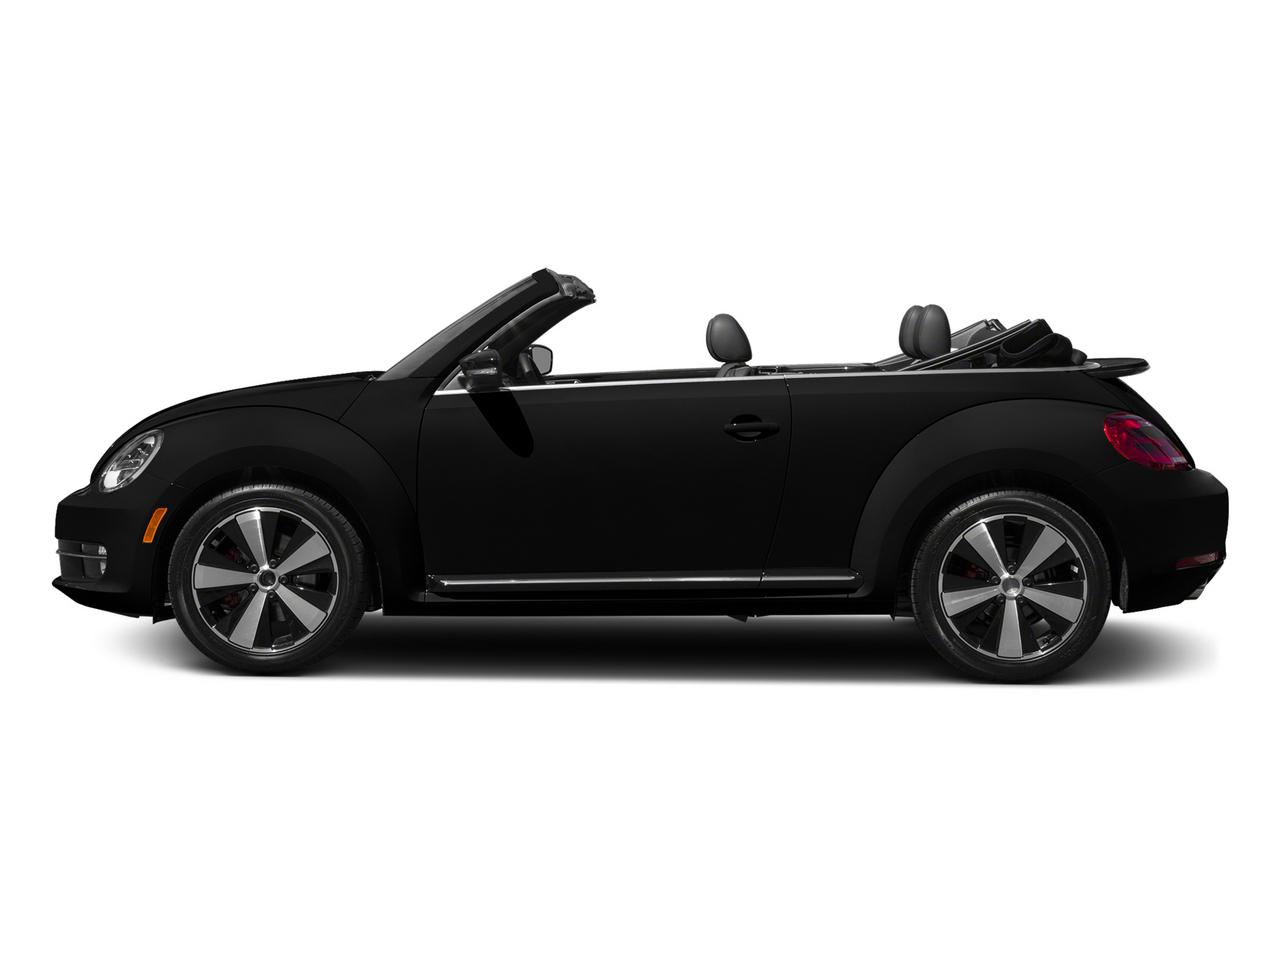 Used 2015 Volkswagen Beetle 1.8 with VIN 3VW507AT7FM806413 for sale in Denton, TX